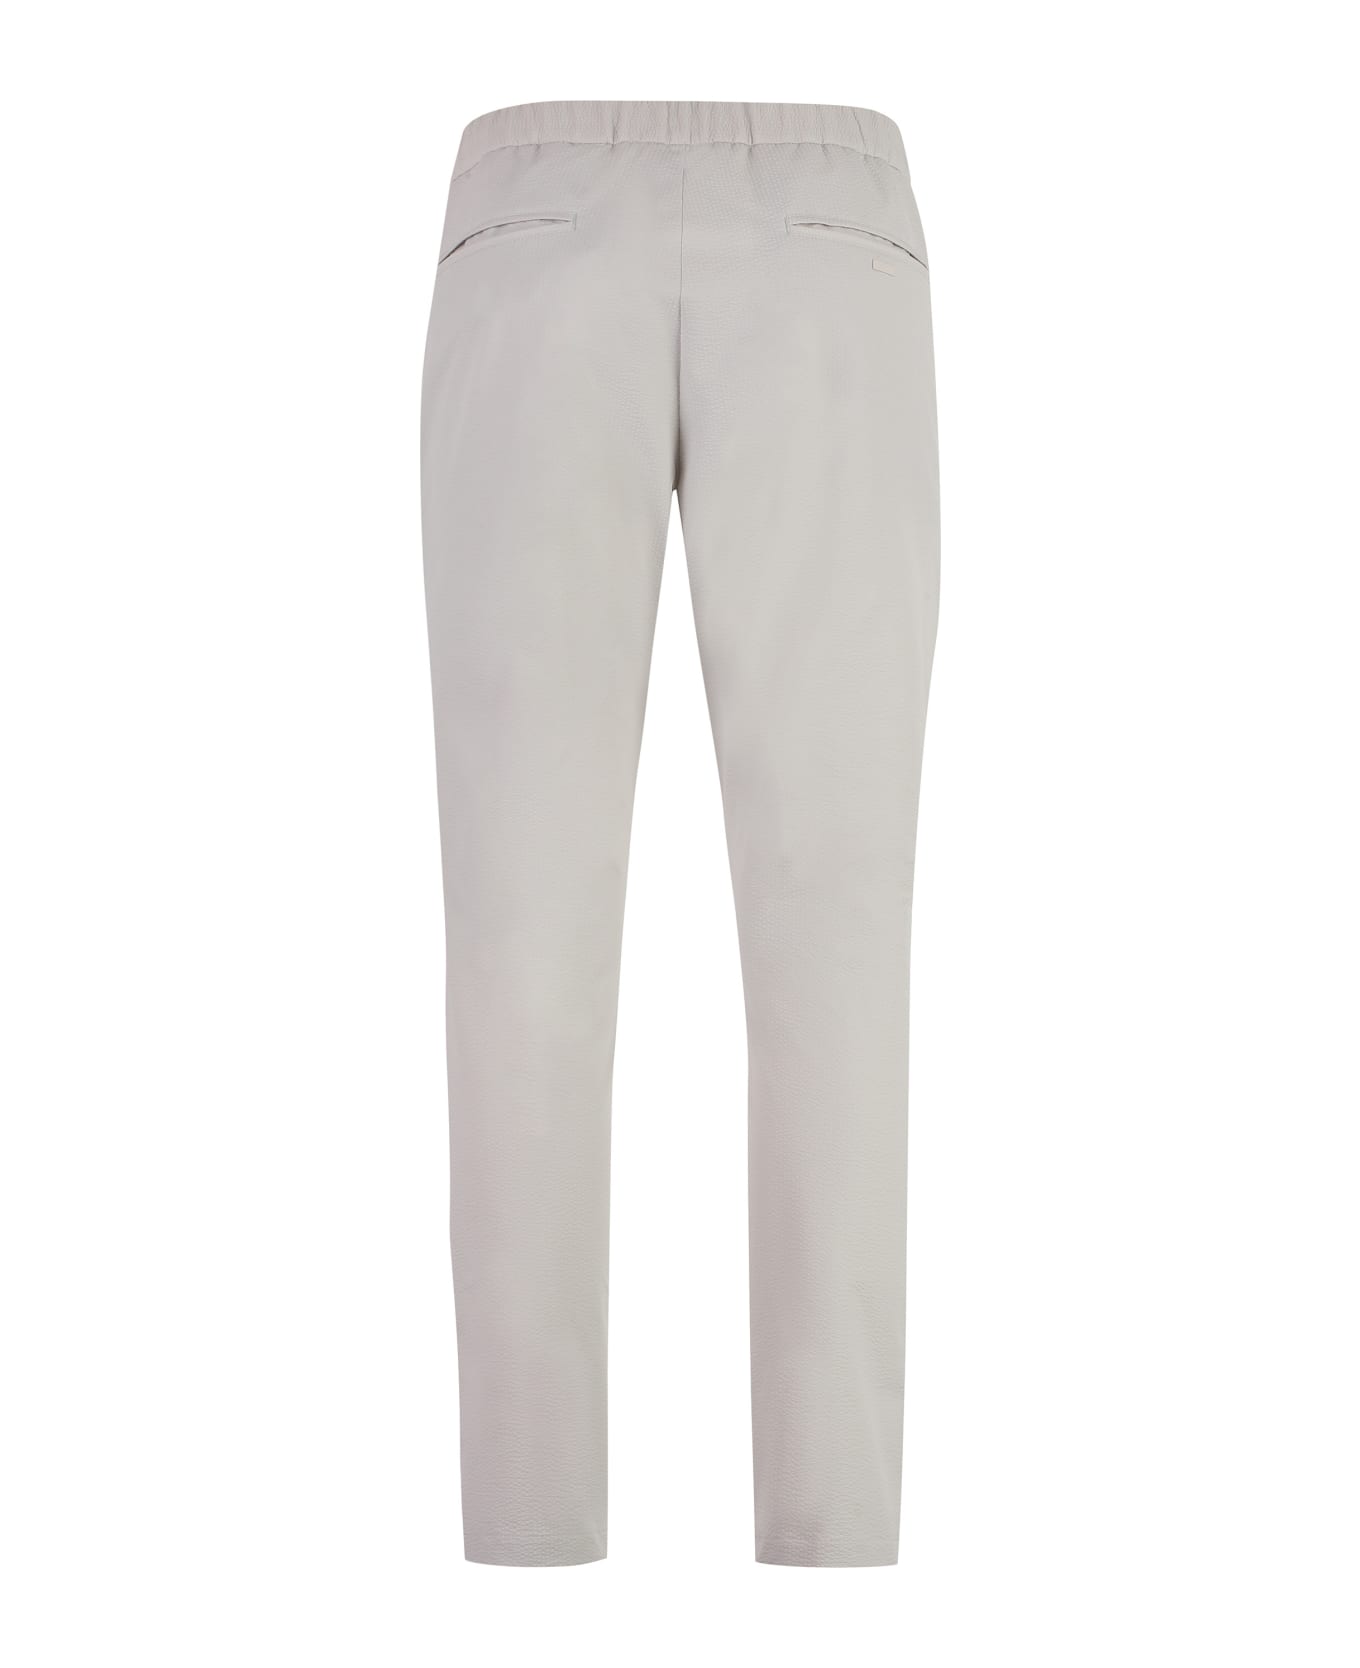 Herno Wavy Touch Laminar Trousers - Light Grey ボトムス